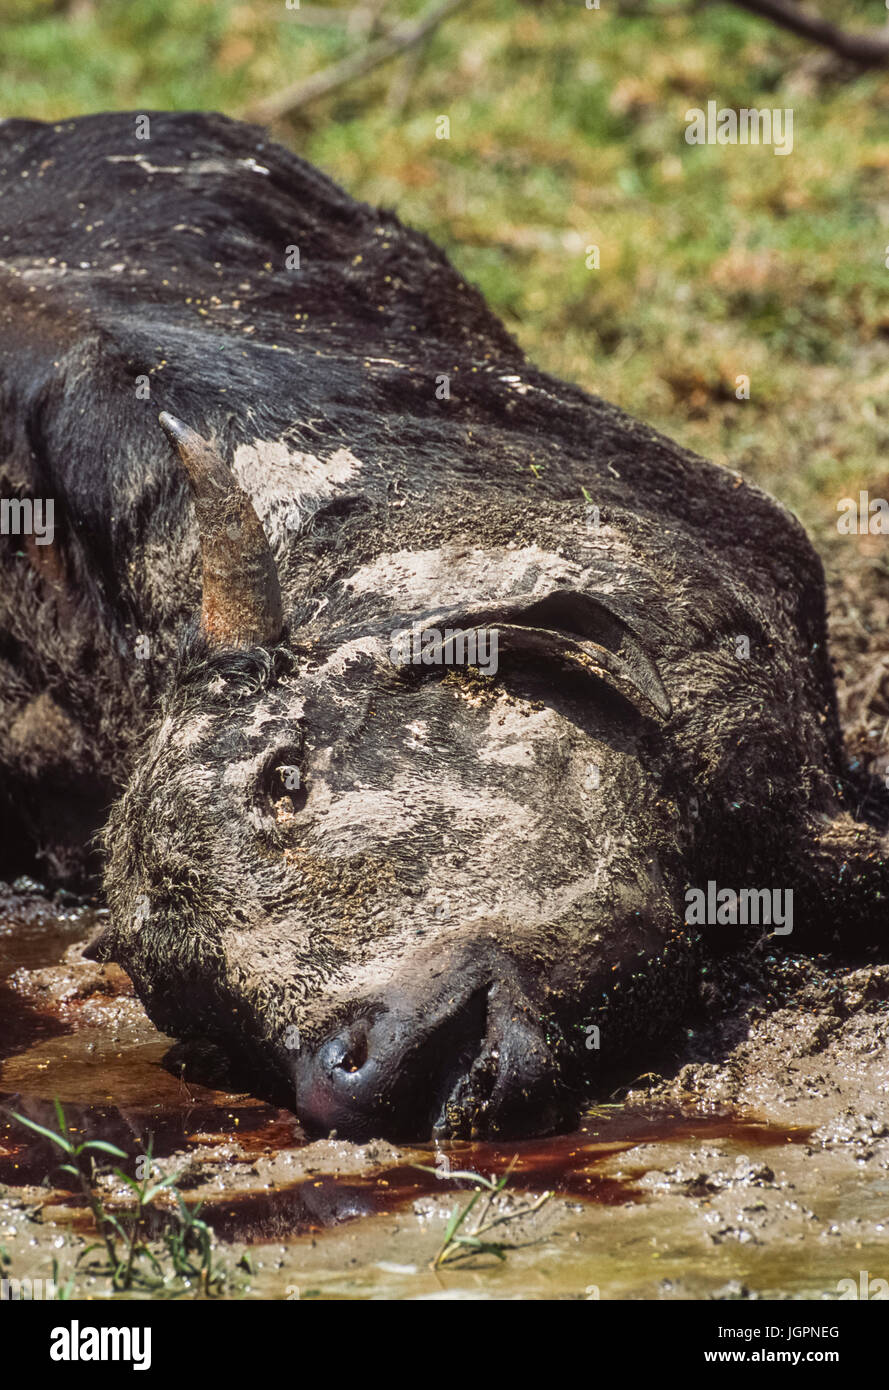 Dead cow, an Indian Zebu, (Bos indicus or Bos taurus indicus), victim of drought in Keoladeo Ghana National Park, Bharatpur, Rajasthan, India Stock Photo